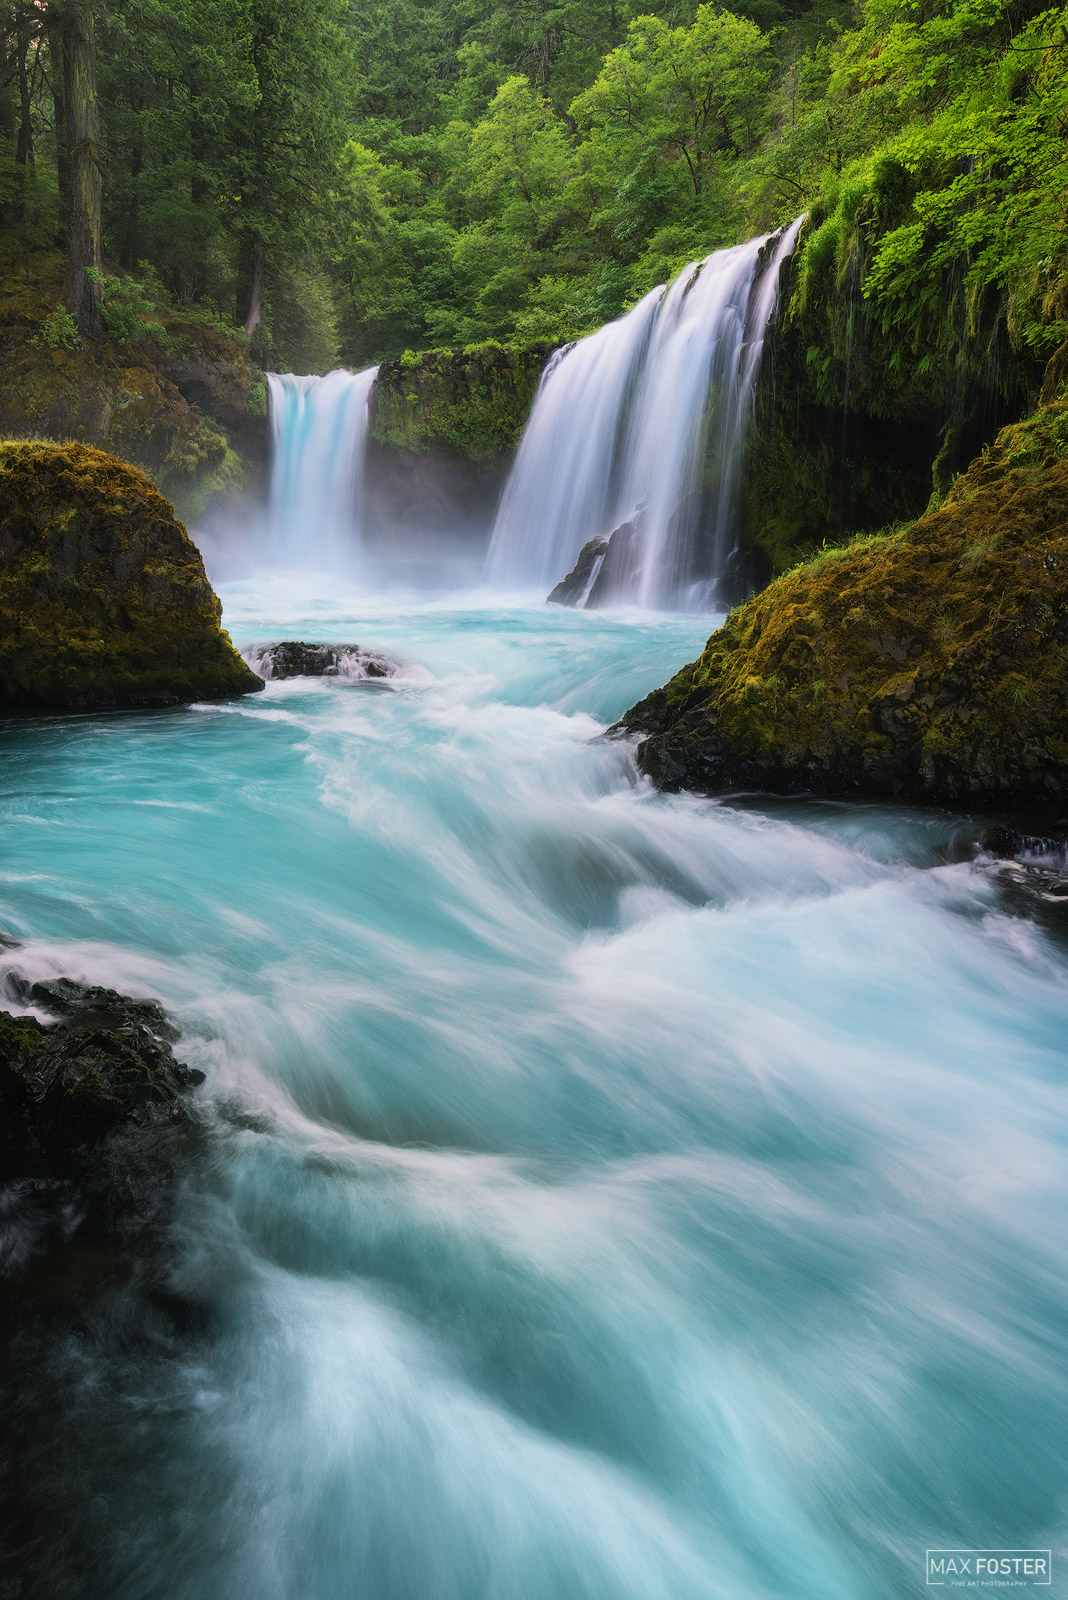 Refresh your space with Cascades of Blue, Max Foster's limited edition photography print of Spirit Falls in Washington from his...